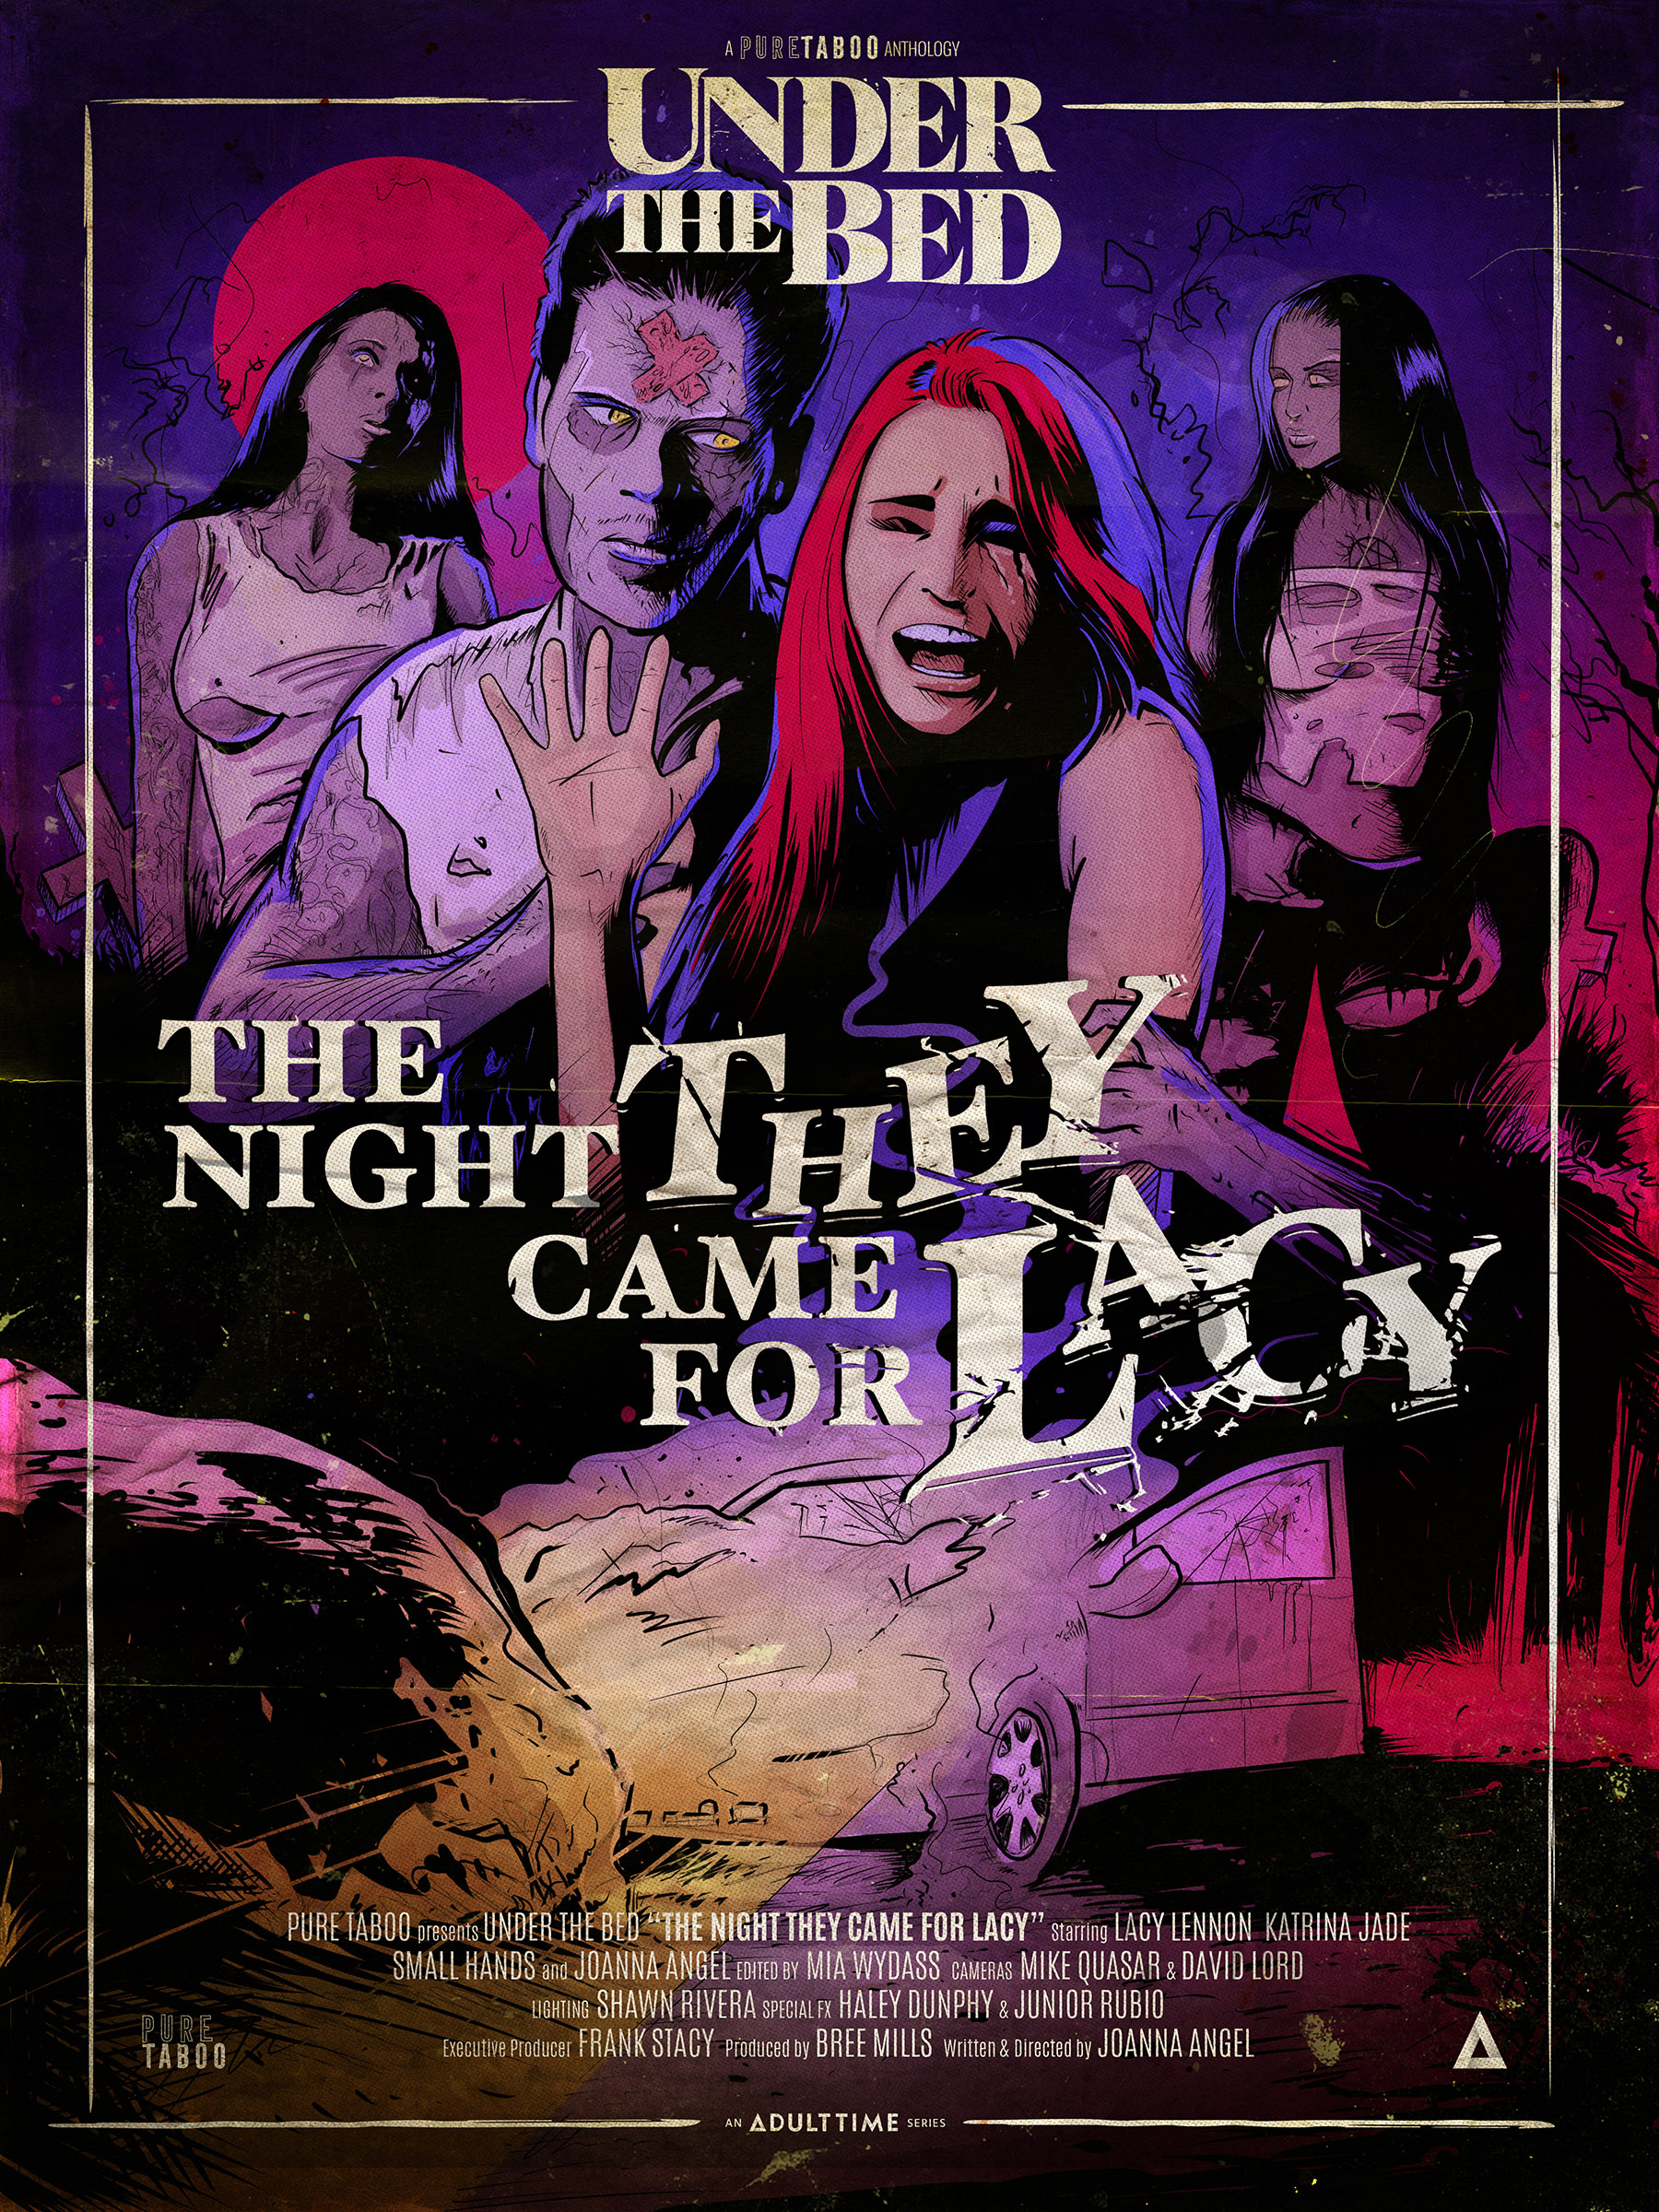 Under The Bed - The Night They Came For Lacy